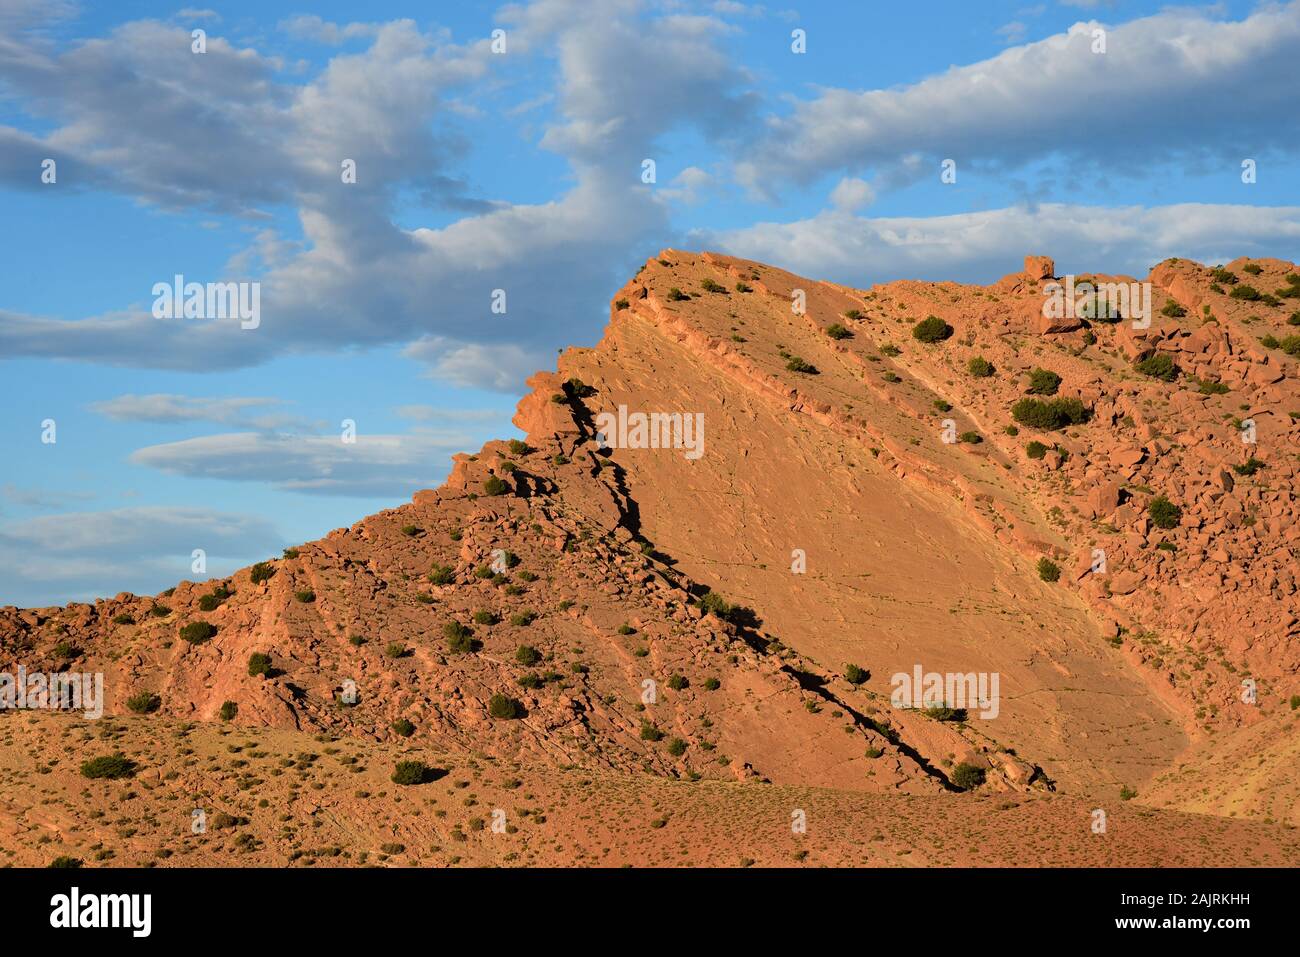 The mountainous landscape shines in the early morning Moroccan sunlight, close to Tighza Village, High Atlas Mountains, Morocco, Northern Africa. Stock Photo